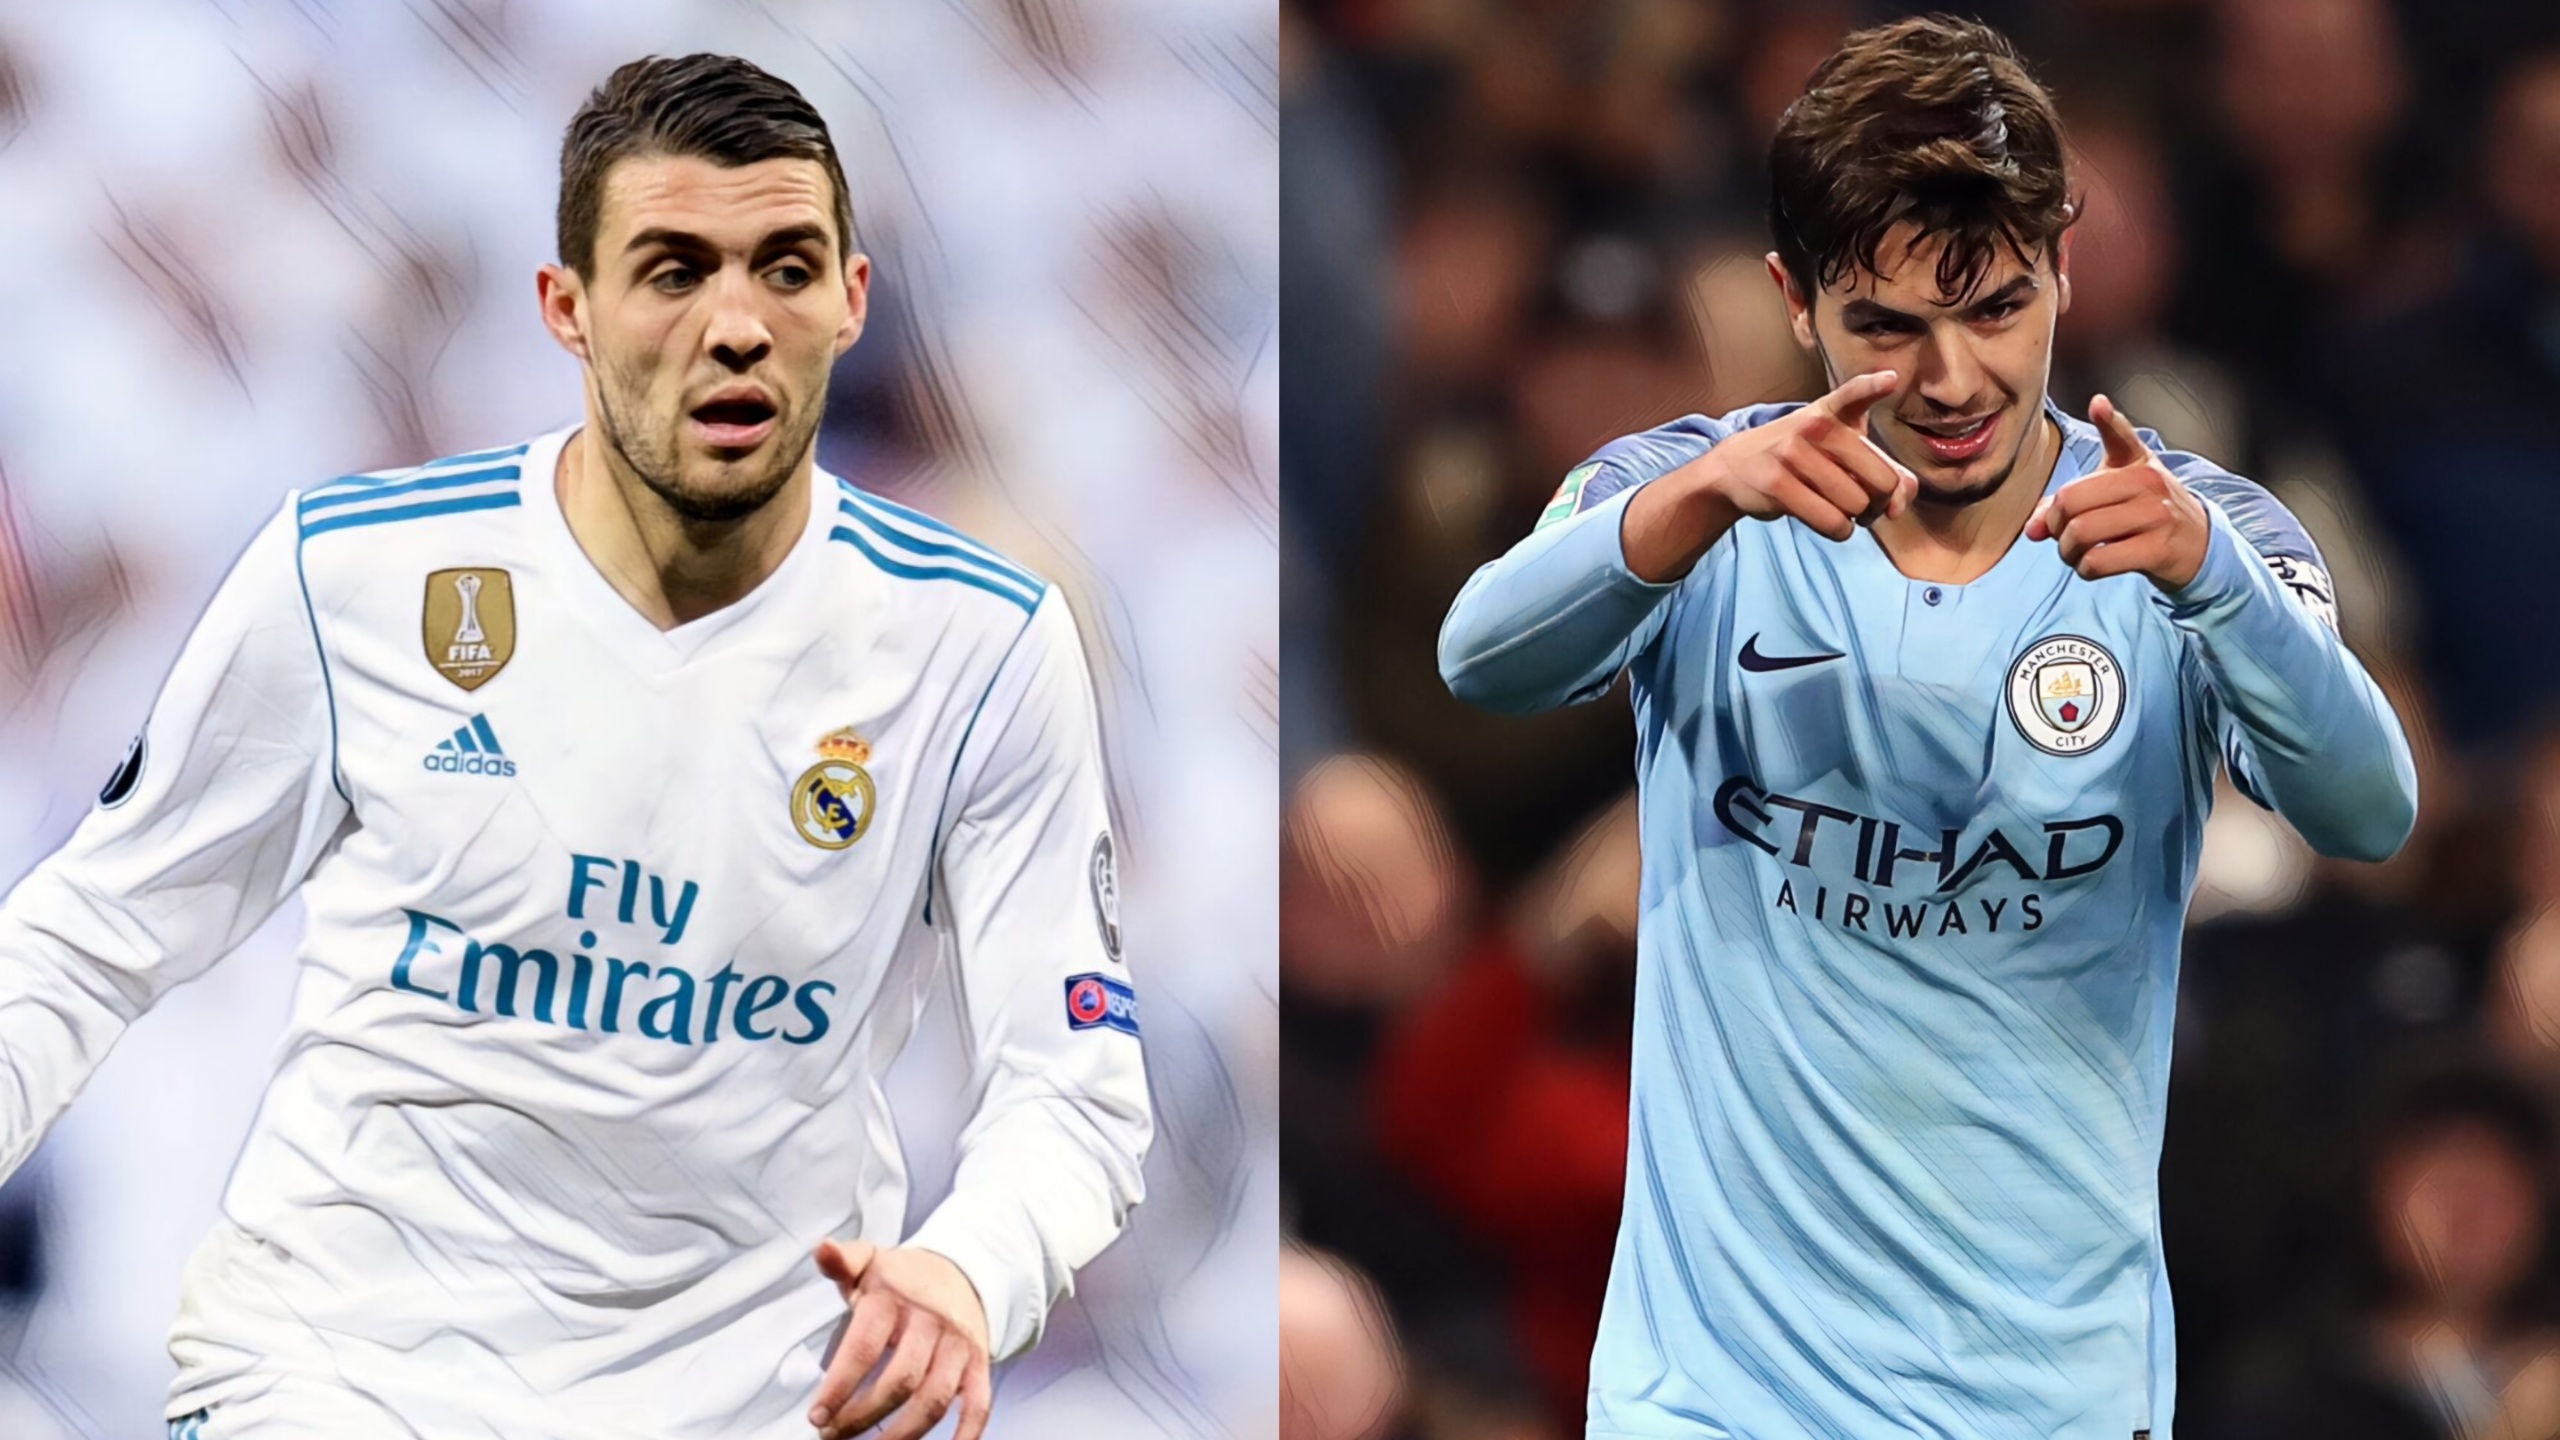 Mateo Kovacic playing for Real Madrid and Brahim Diaz in action for Man City.